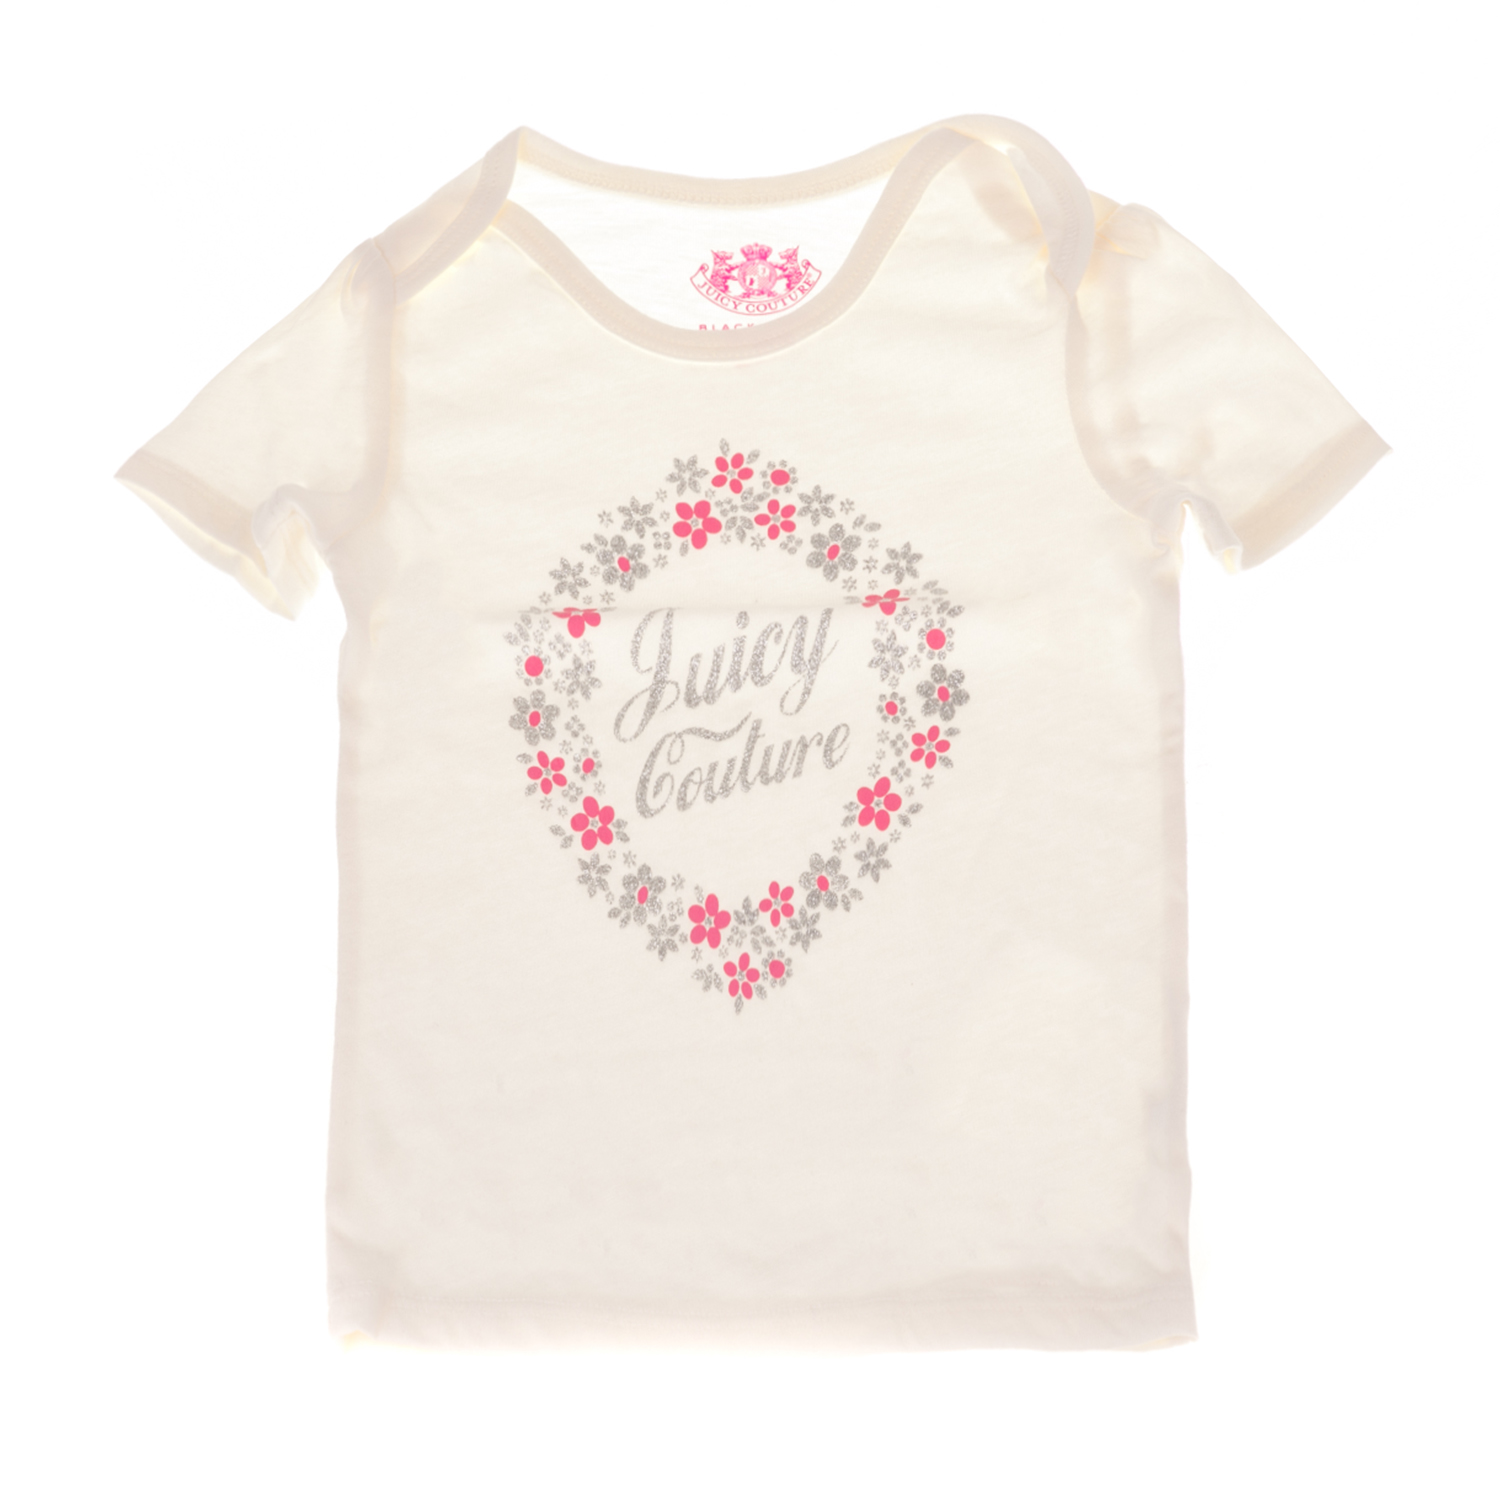 JUICY COUTURE KIDS - Βρεφικό t-shirt JUICY COUTURE KIDS FLORAL CAMEO λευκό Παιδικά/Baby/Ρούχα/Μπλούζες